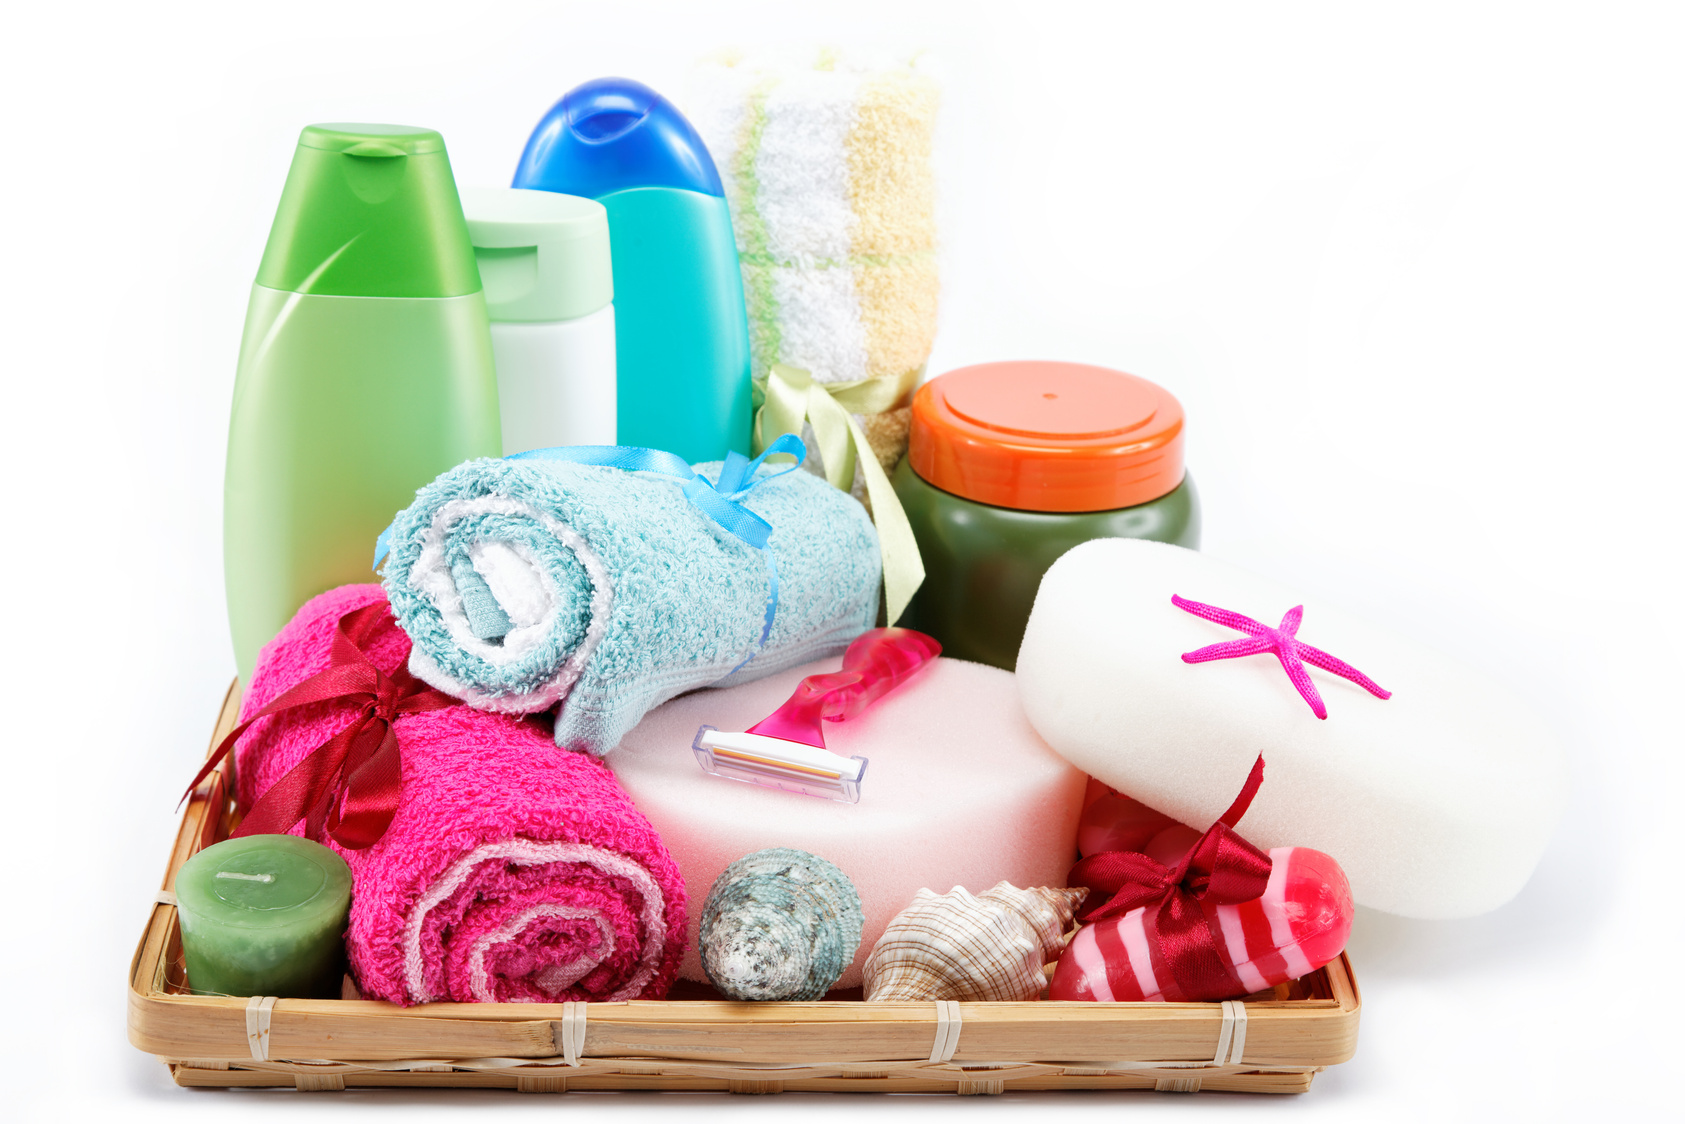 Personal hygiene items. Accessories for sauna or spa